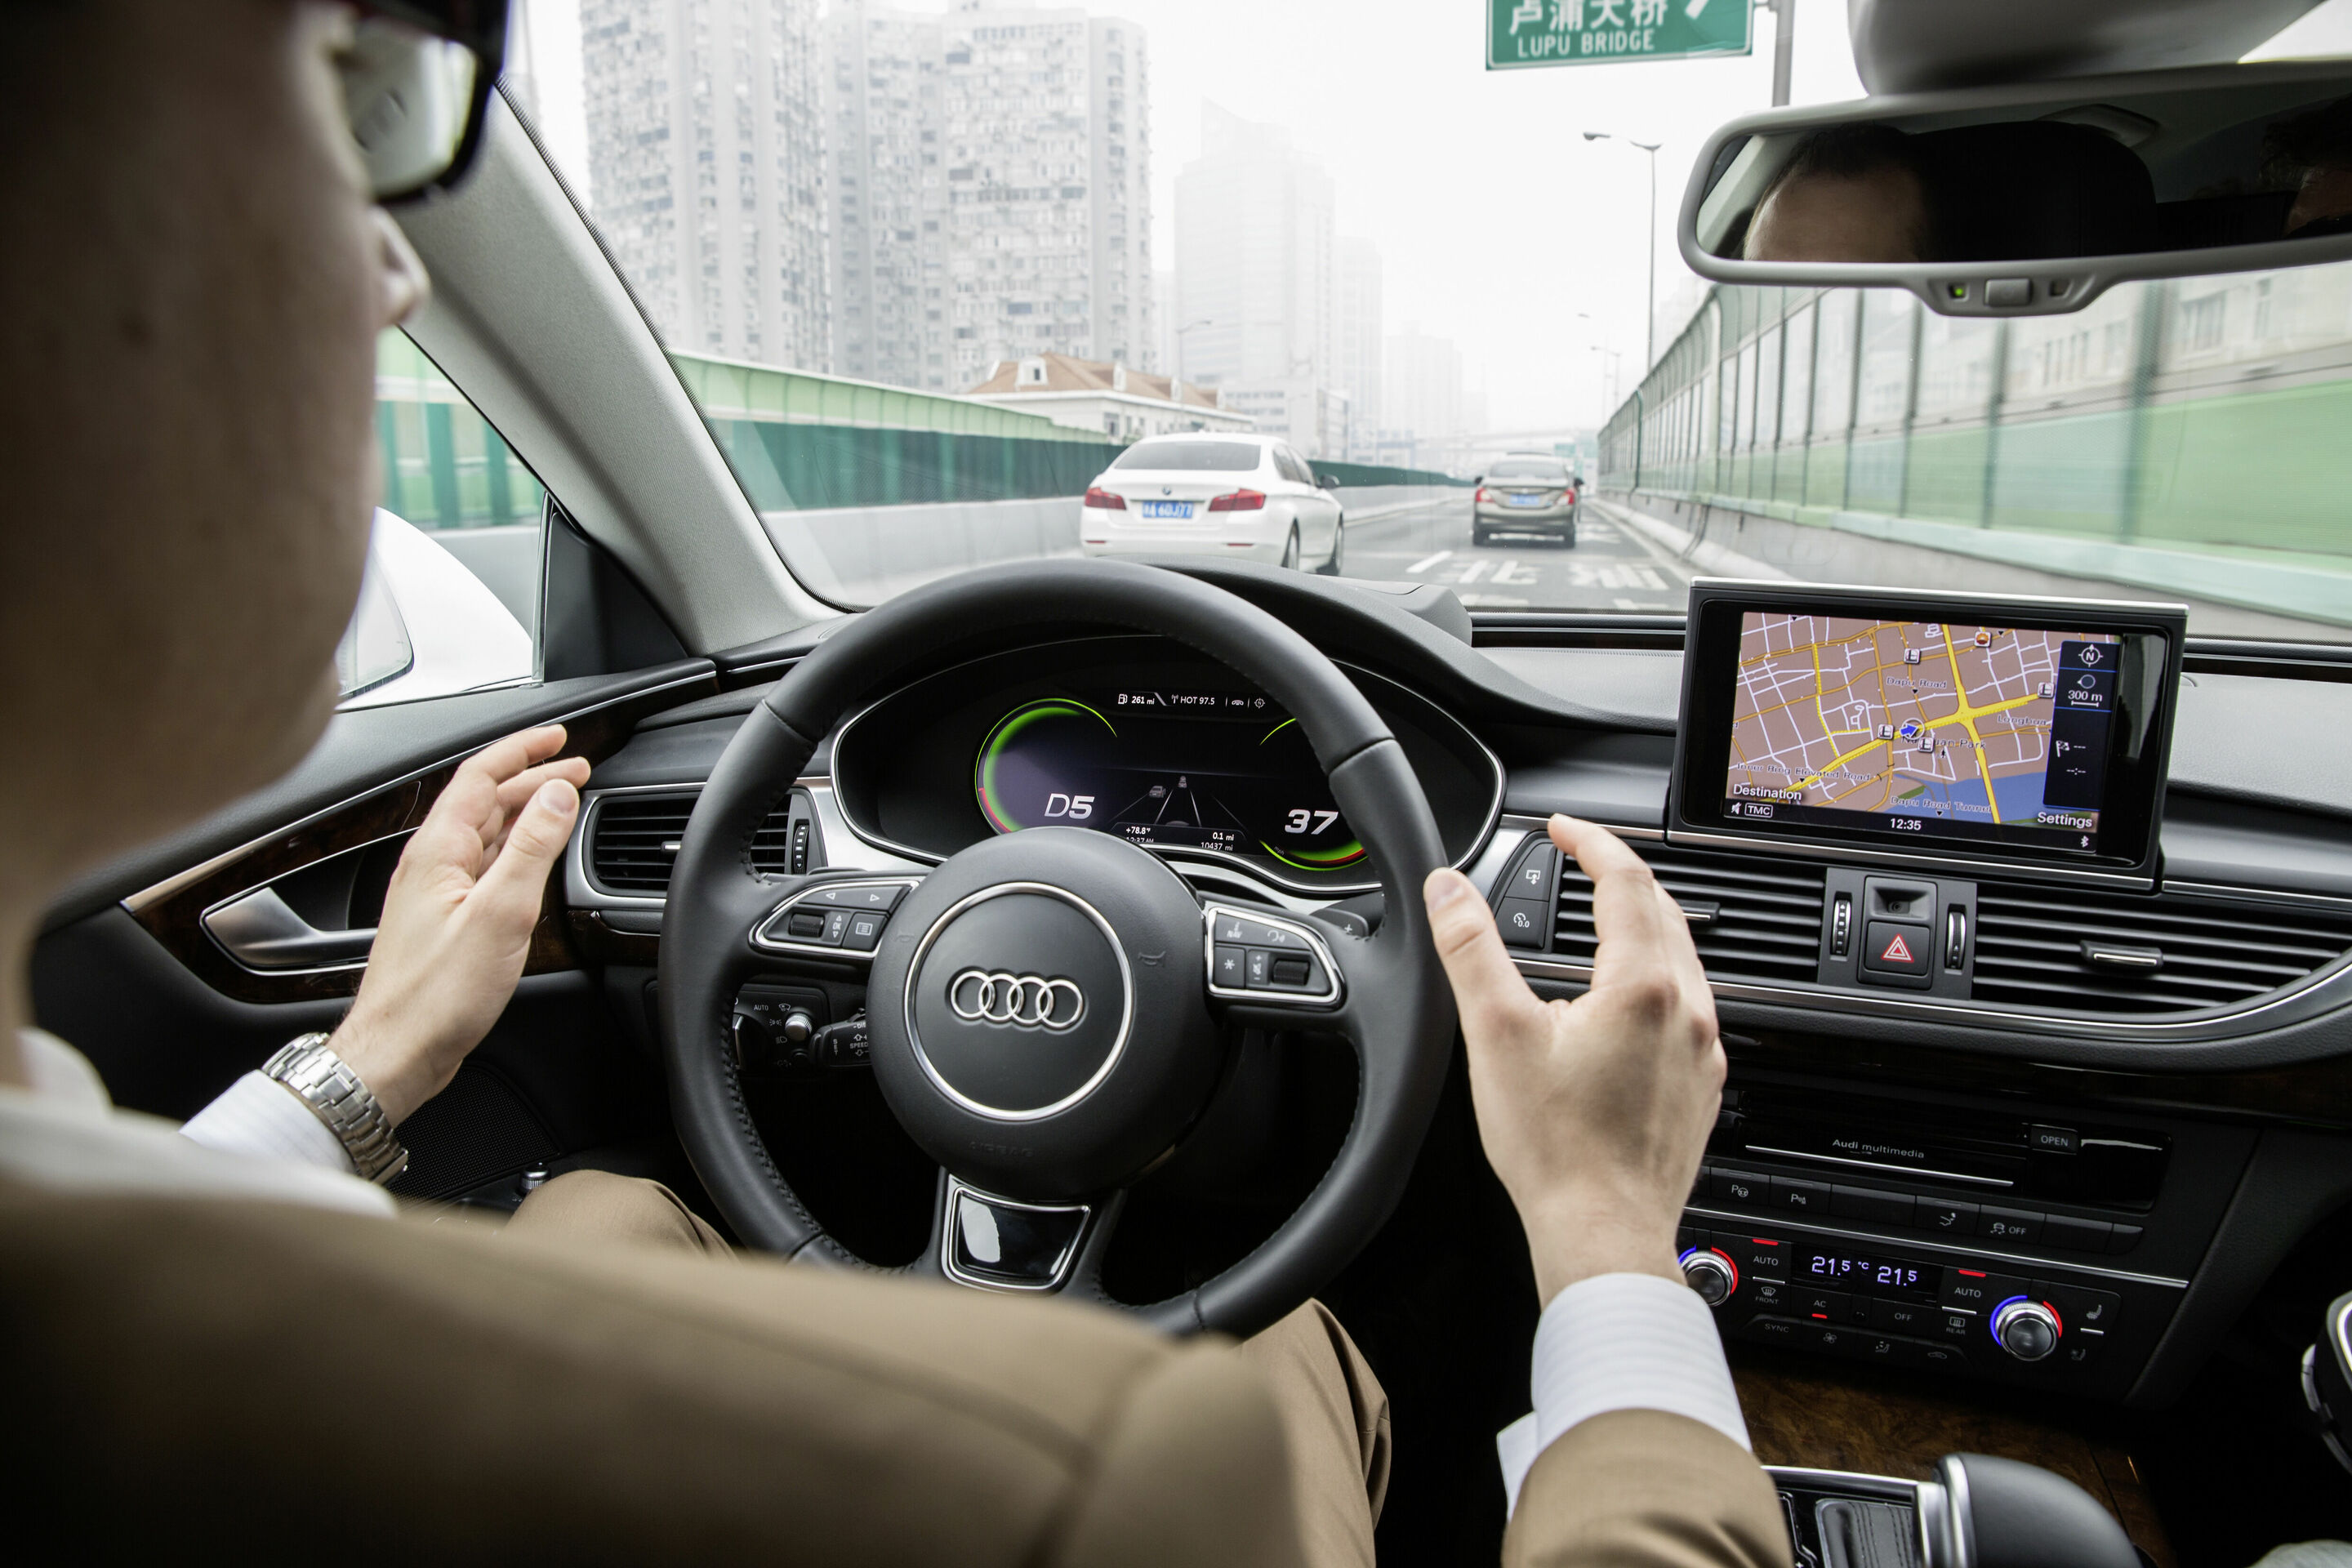 Audi A7 Sportback piloted driving